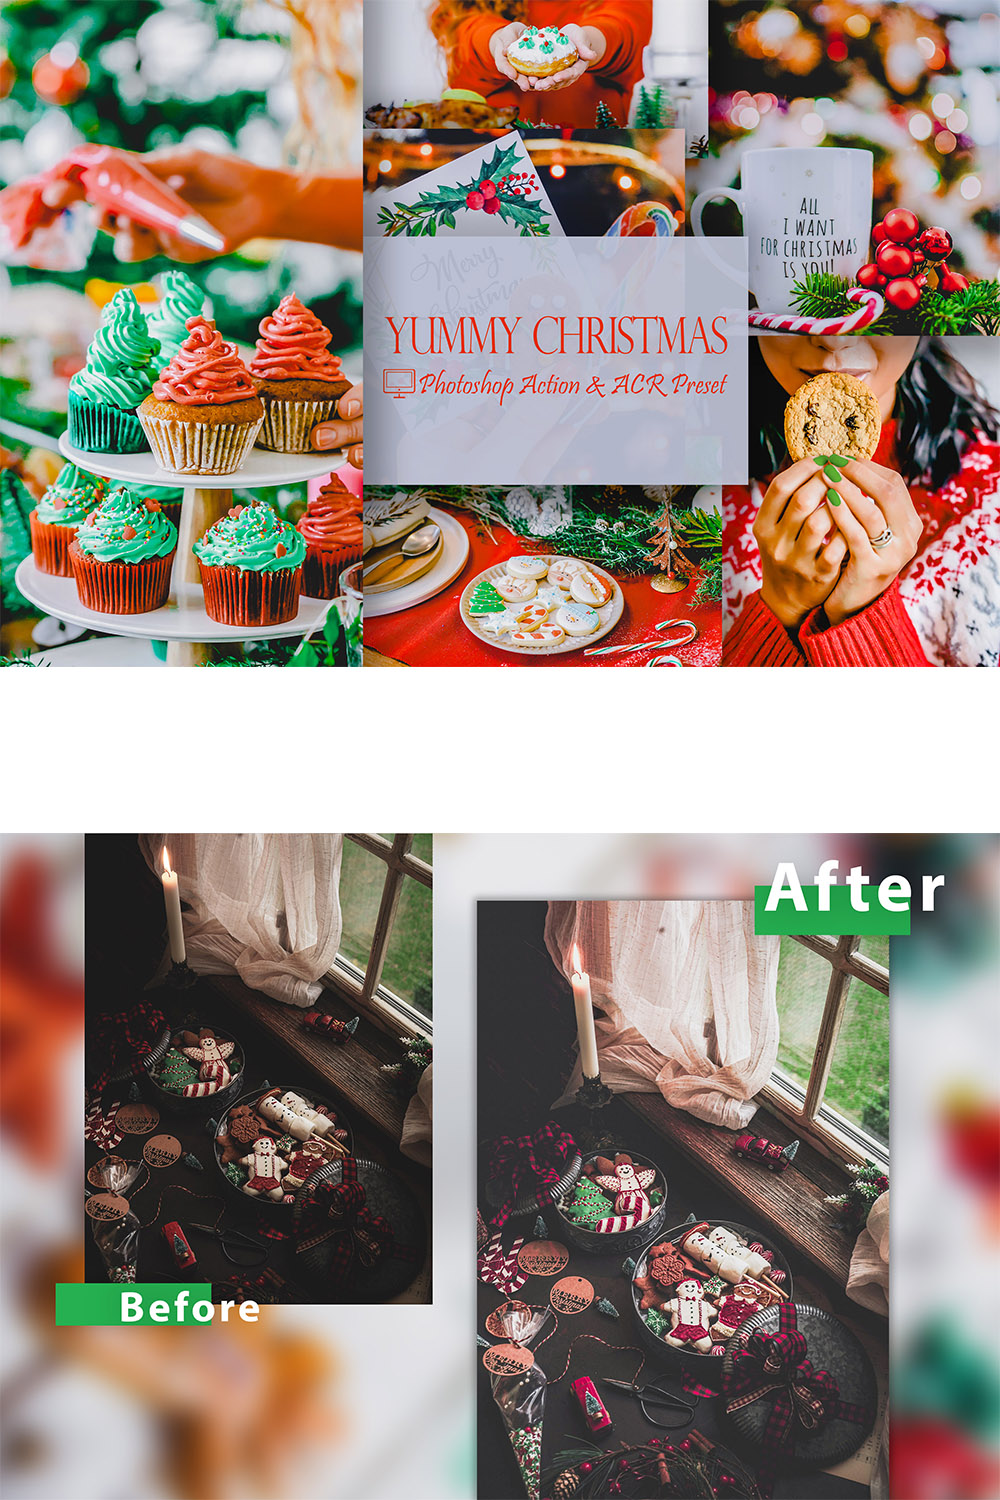 12 Photoshop Actions, Yummy Christmas Ps Action, Xmas ACR Preset, Saturation Filter, Lifestyle Theme For Instagram, Colorful Food, Professional Portrait pinterest preview image.